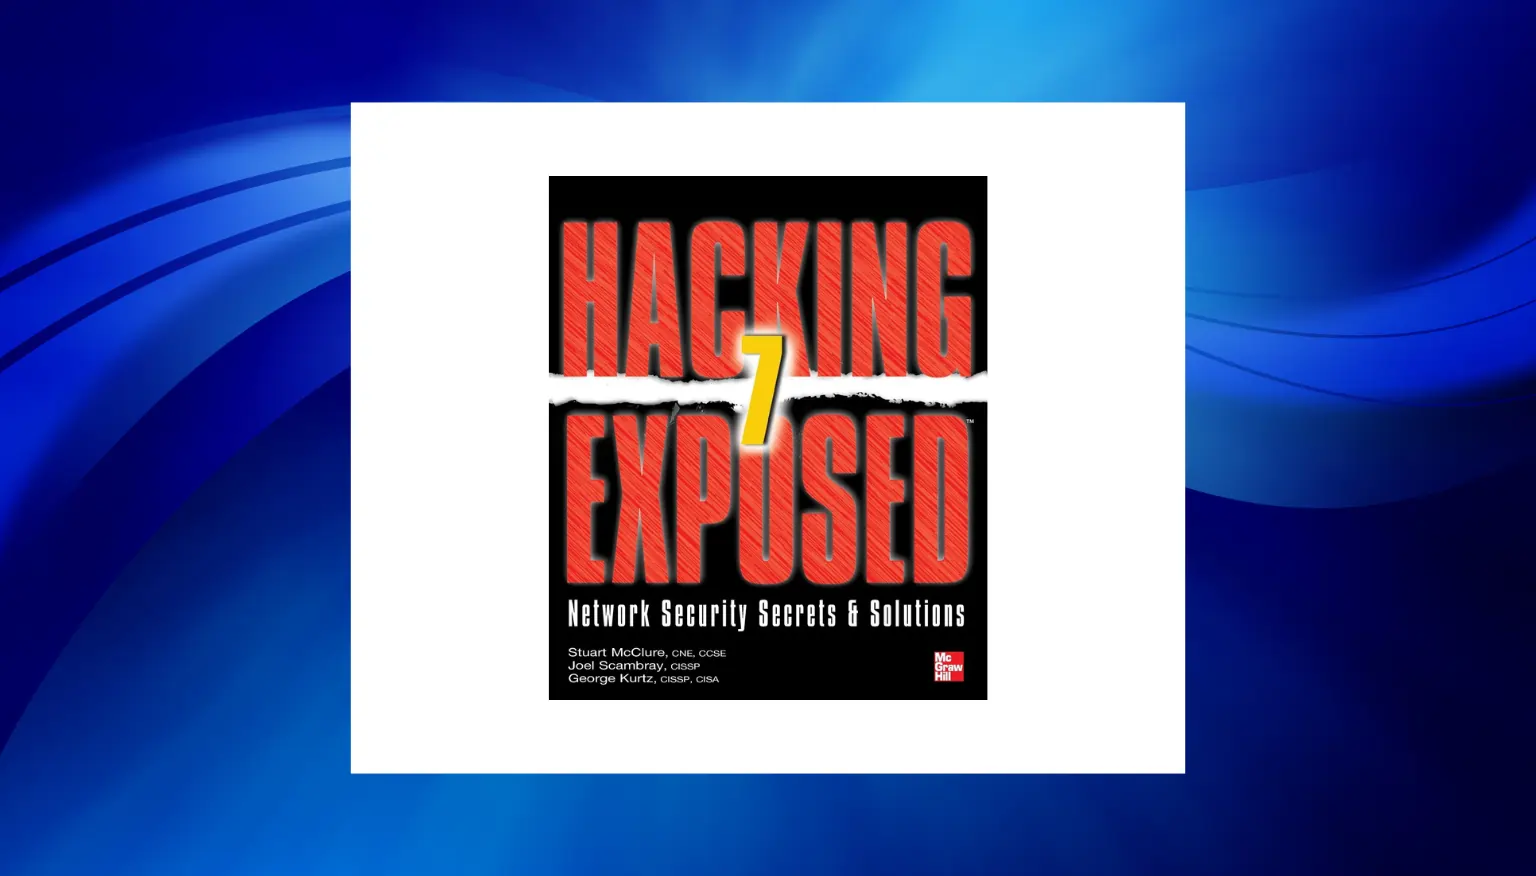 best book for network security - Hacking Exposed 7 by Stuart McClure, Joel Scambray, George Kurtz